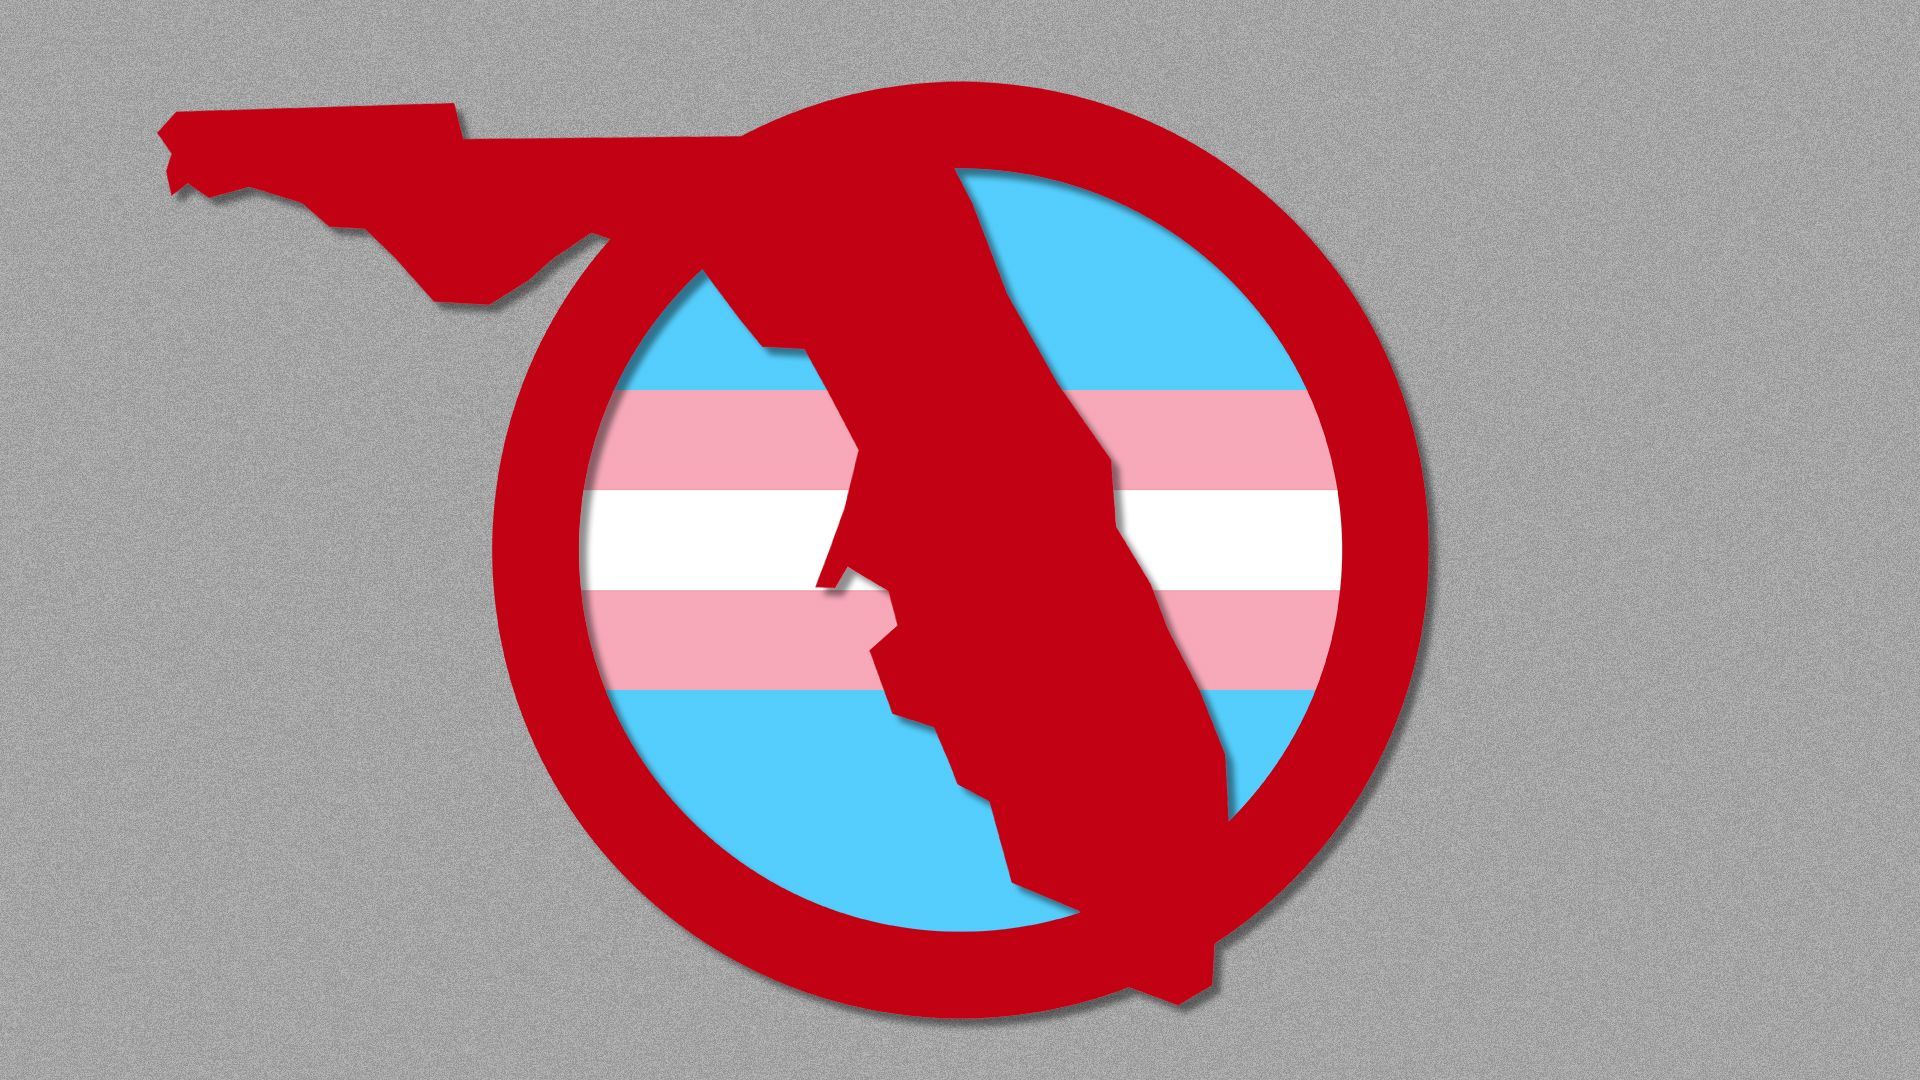 Illustration of a red circle, with the state of Florida forming a bar across it, with the transgender pride flag underneath.